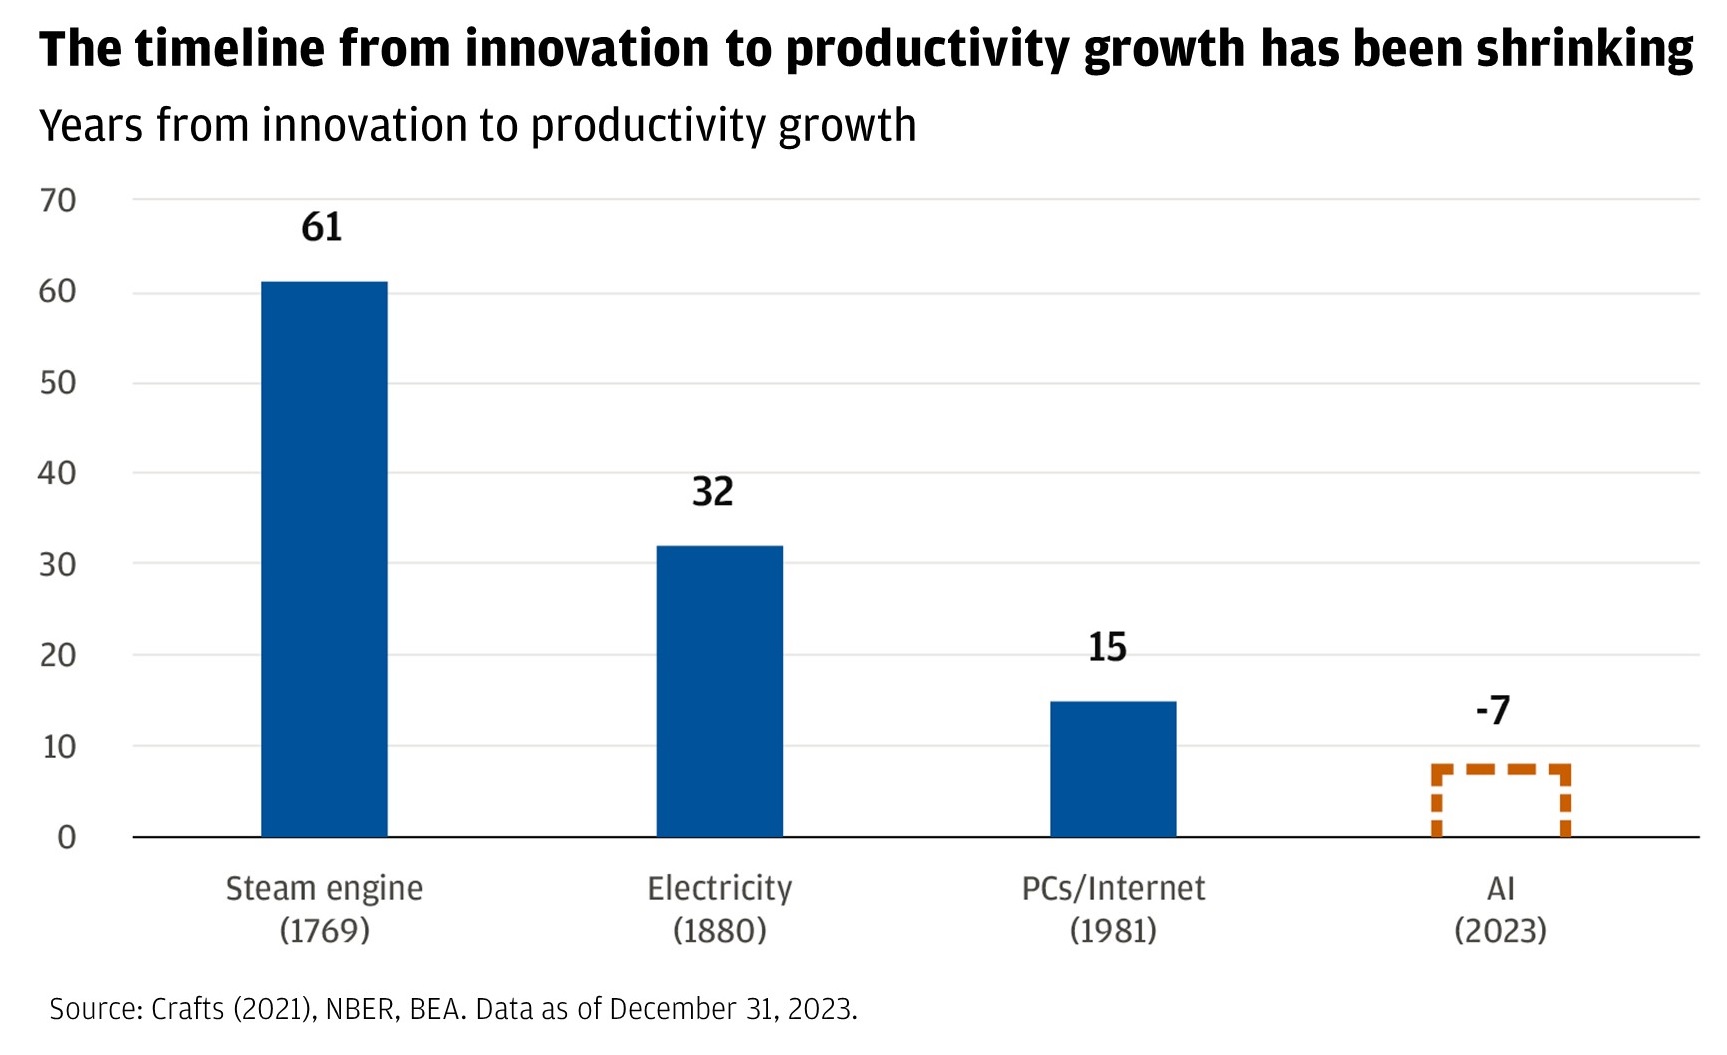 Chart describes years from innovation to productivity growth for innovations including steam engine, electricity, PCs/Internet and AI